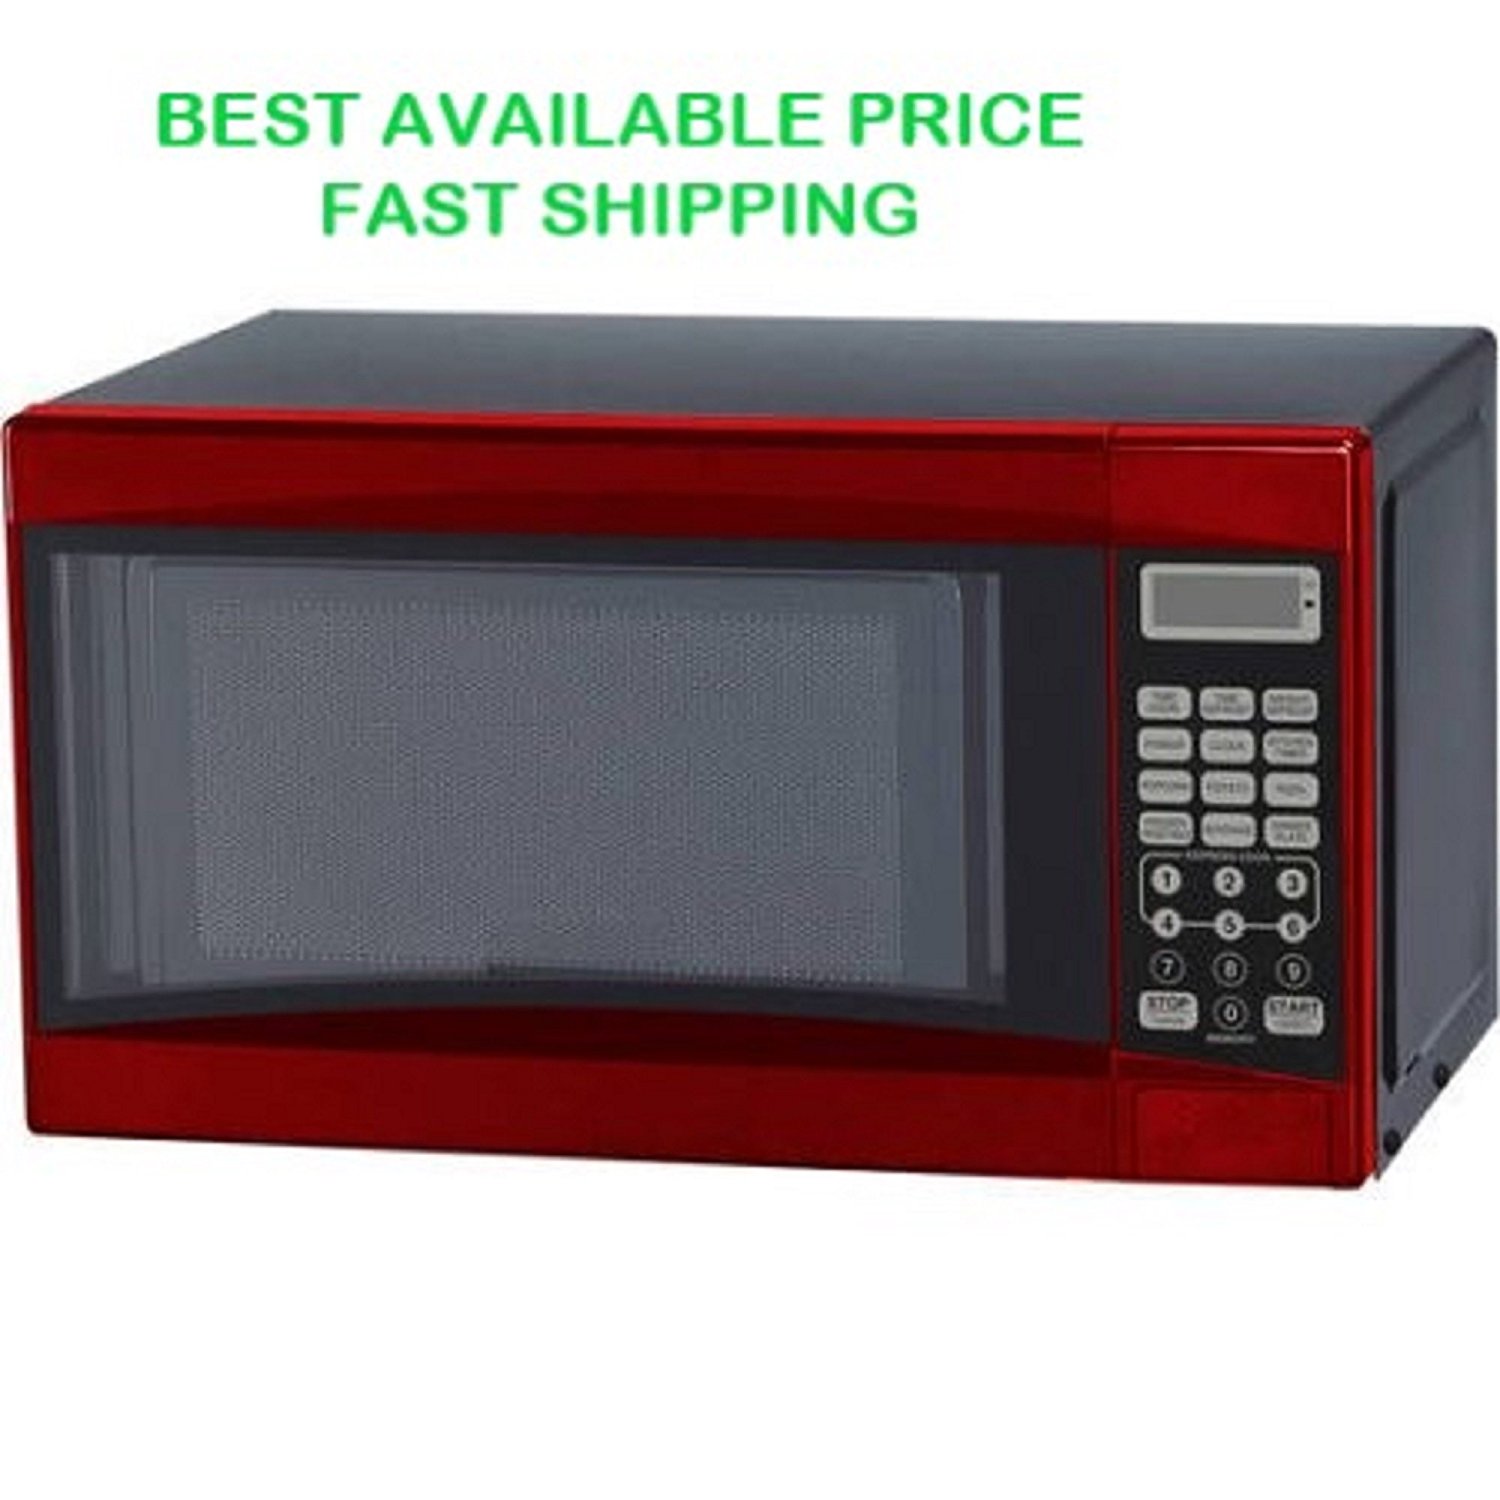 Mainstay Microwave Oven 0.7 cu ft Digital 700W (Red)